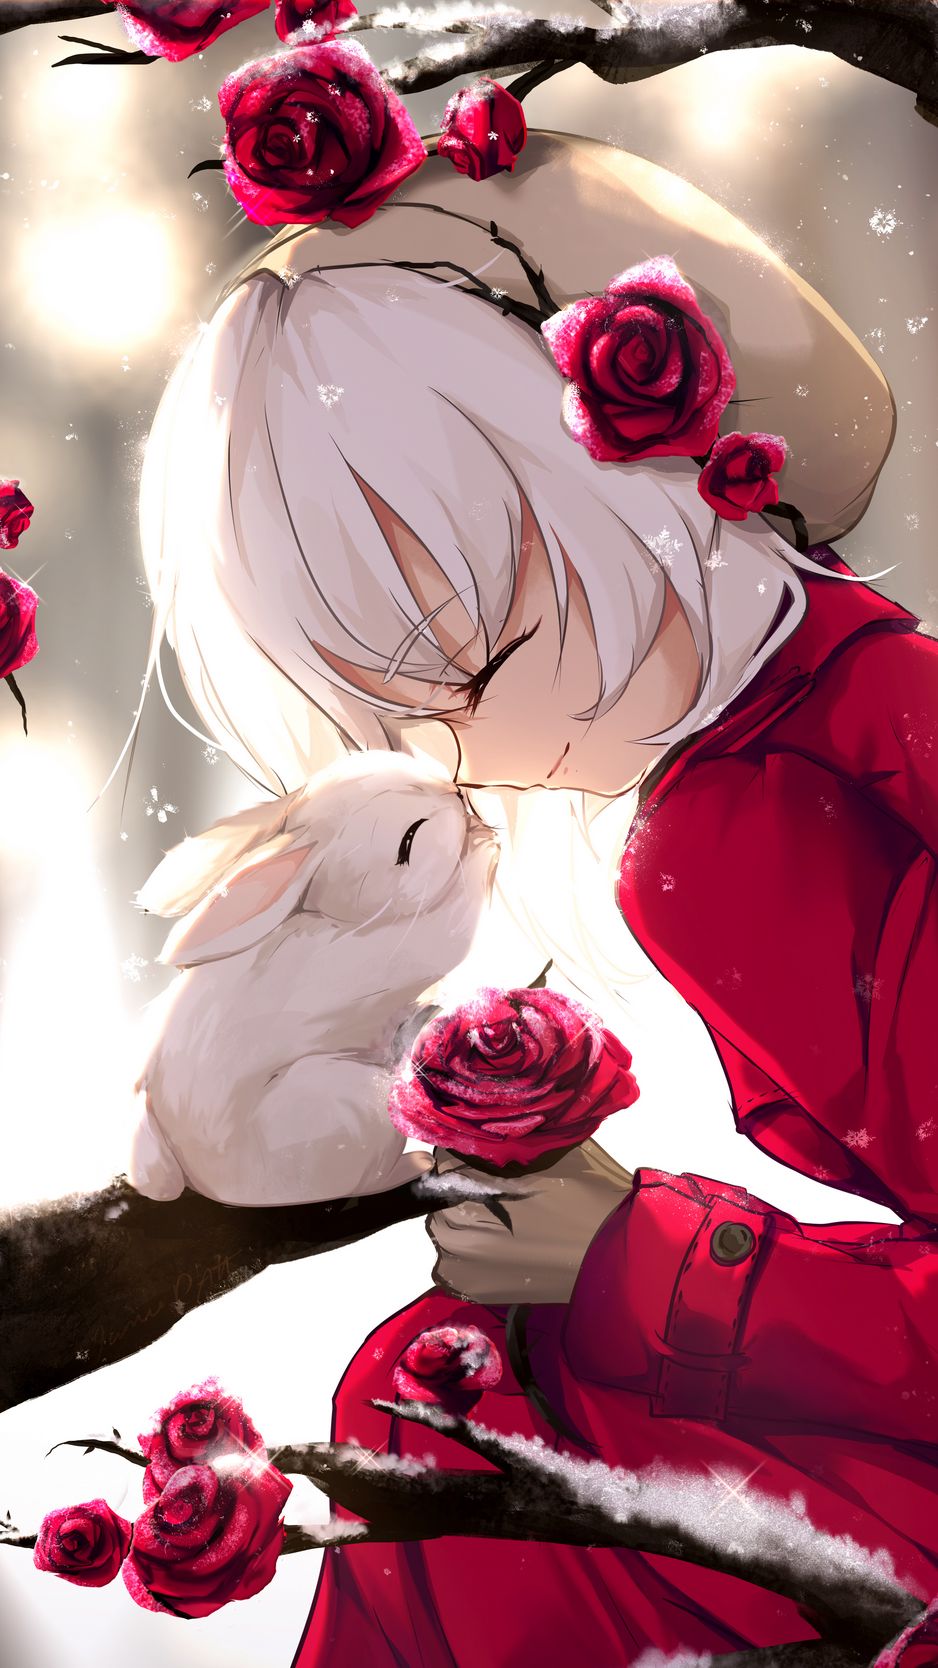 Download wallpaper x girl rabbit happiness smile roses anime iphone s for parallax hd background